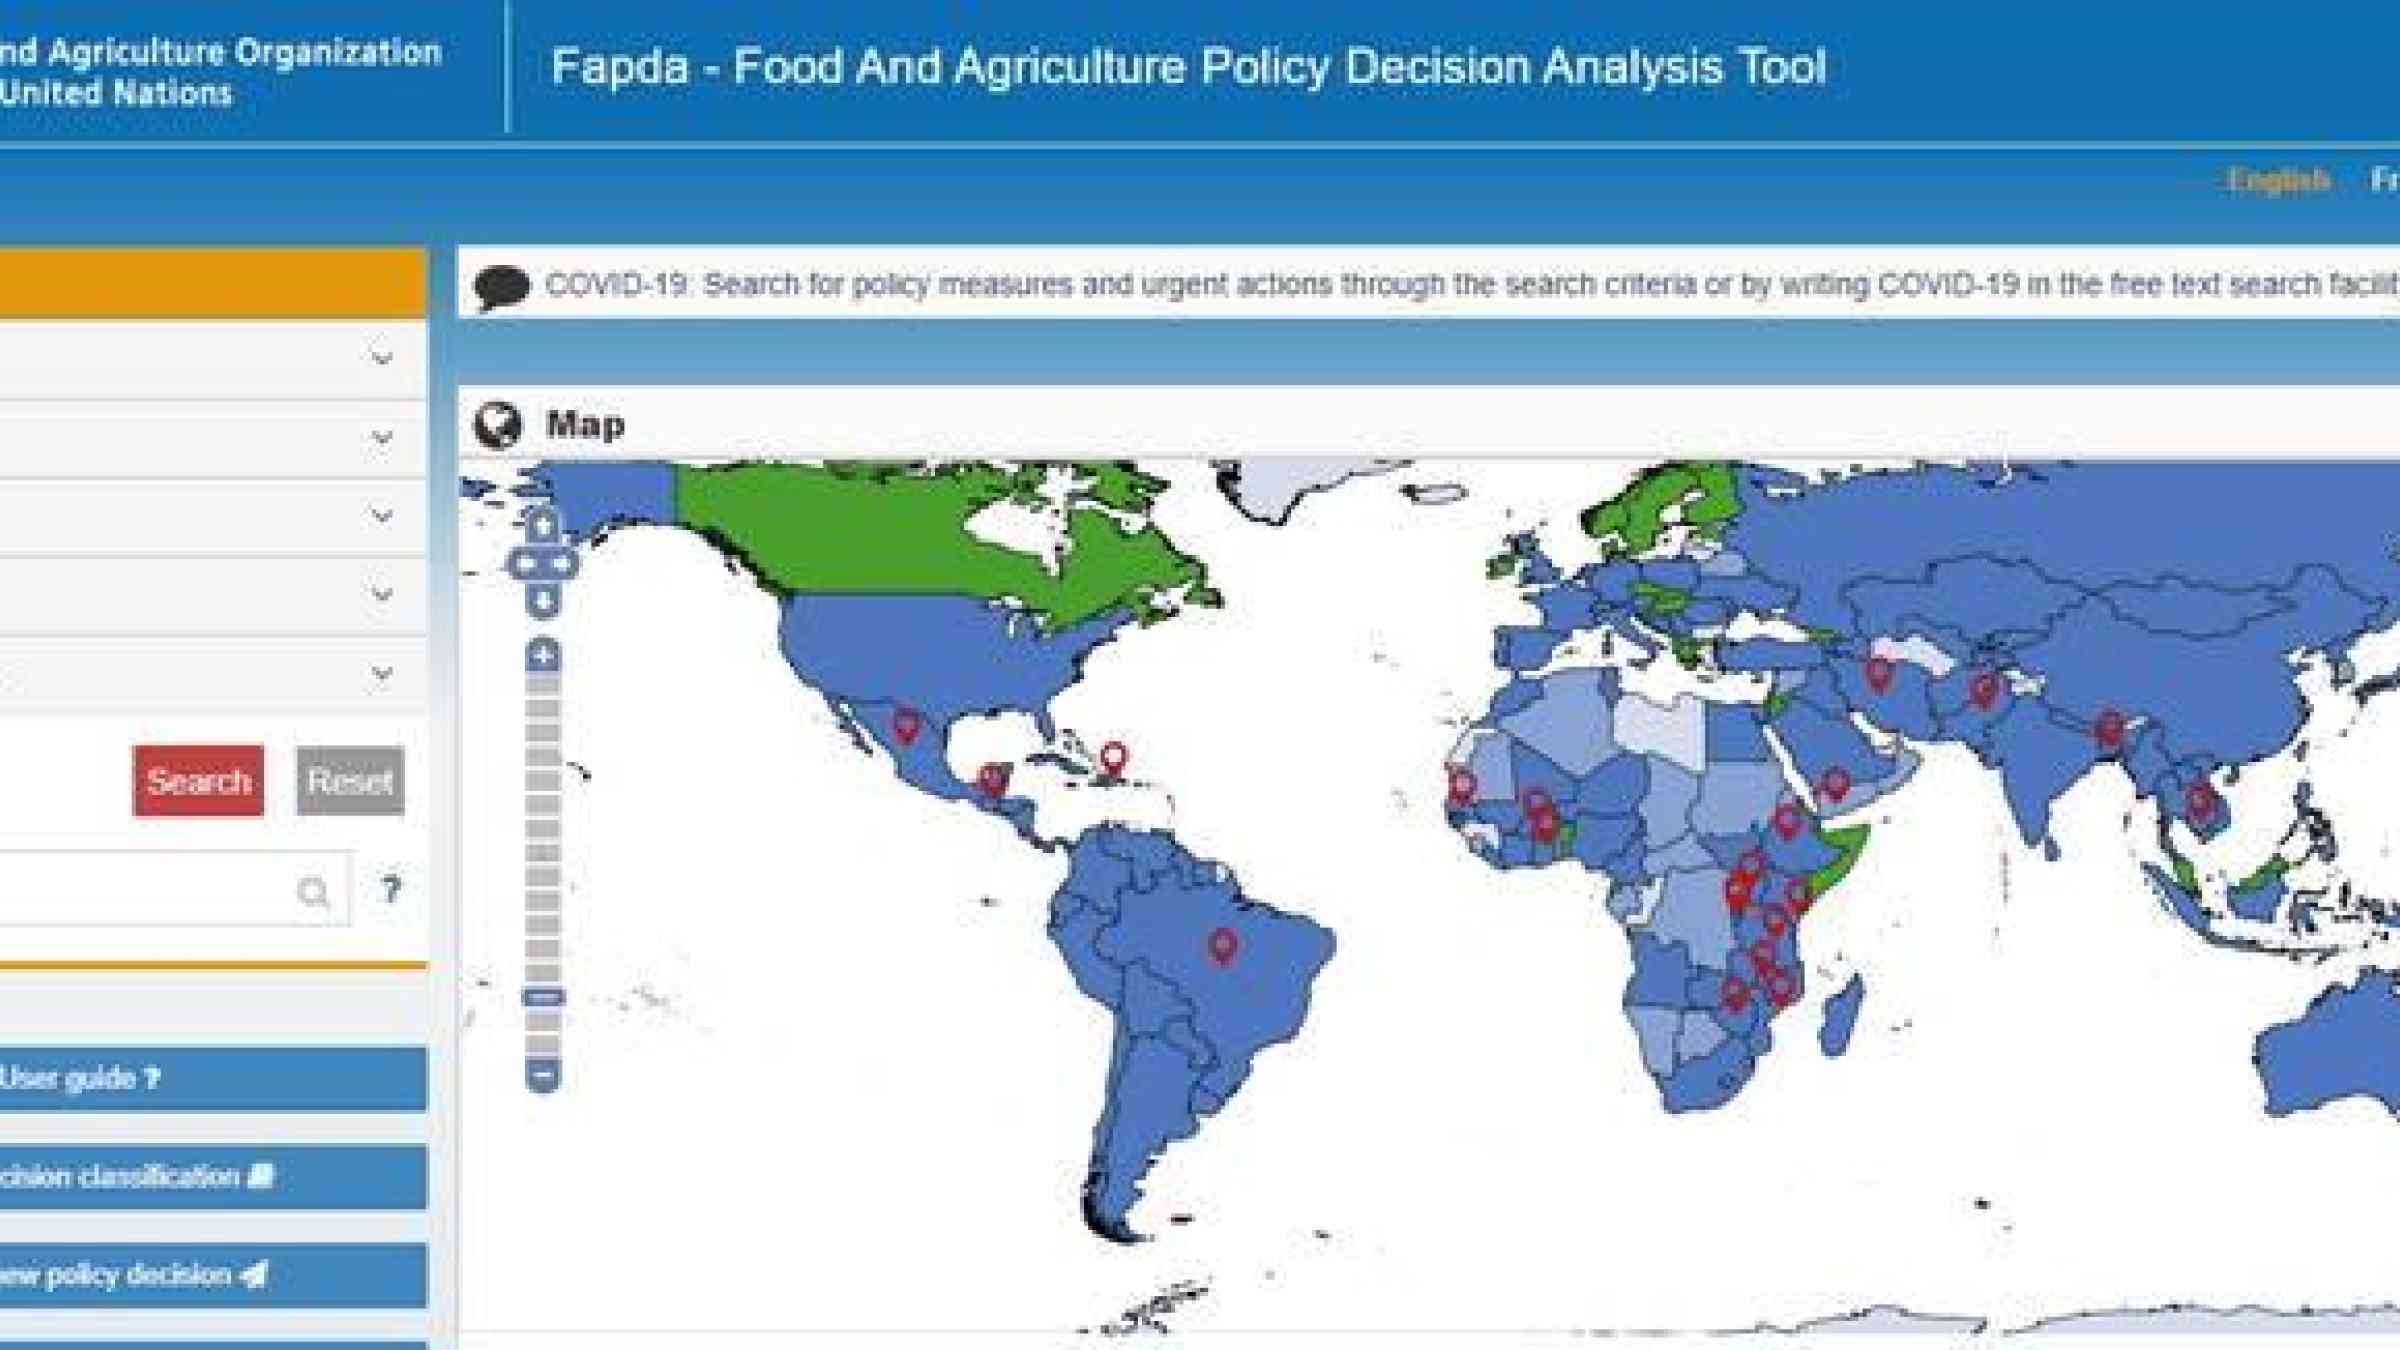 The Food and Agriculture Policy Decision Analysis (FAPDA) Platform